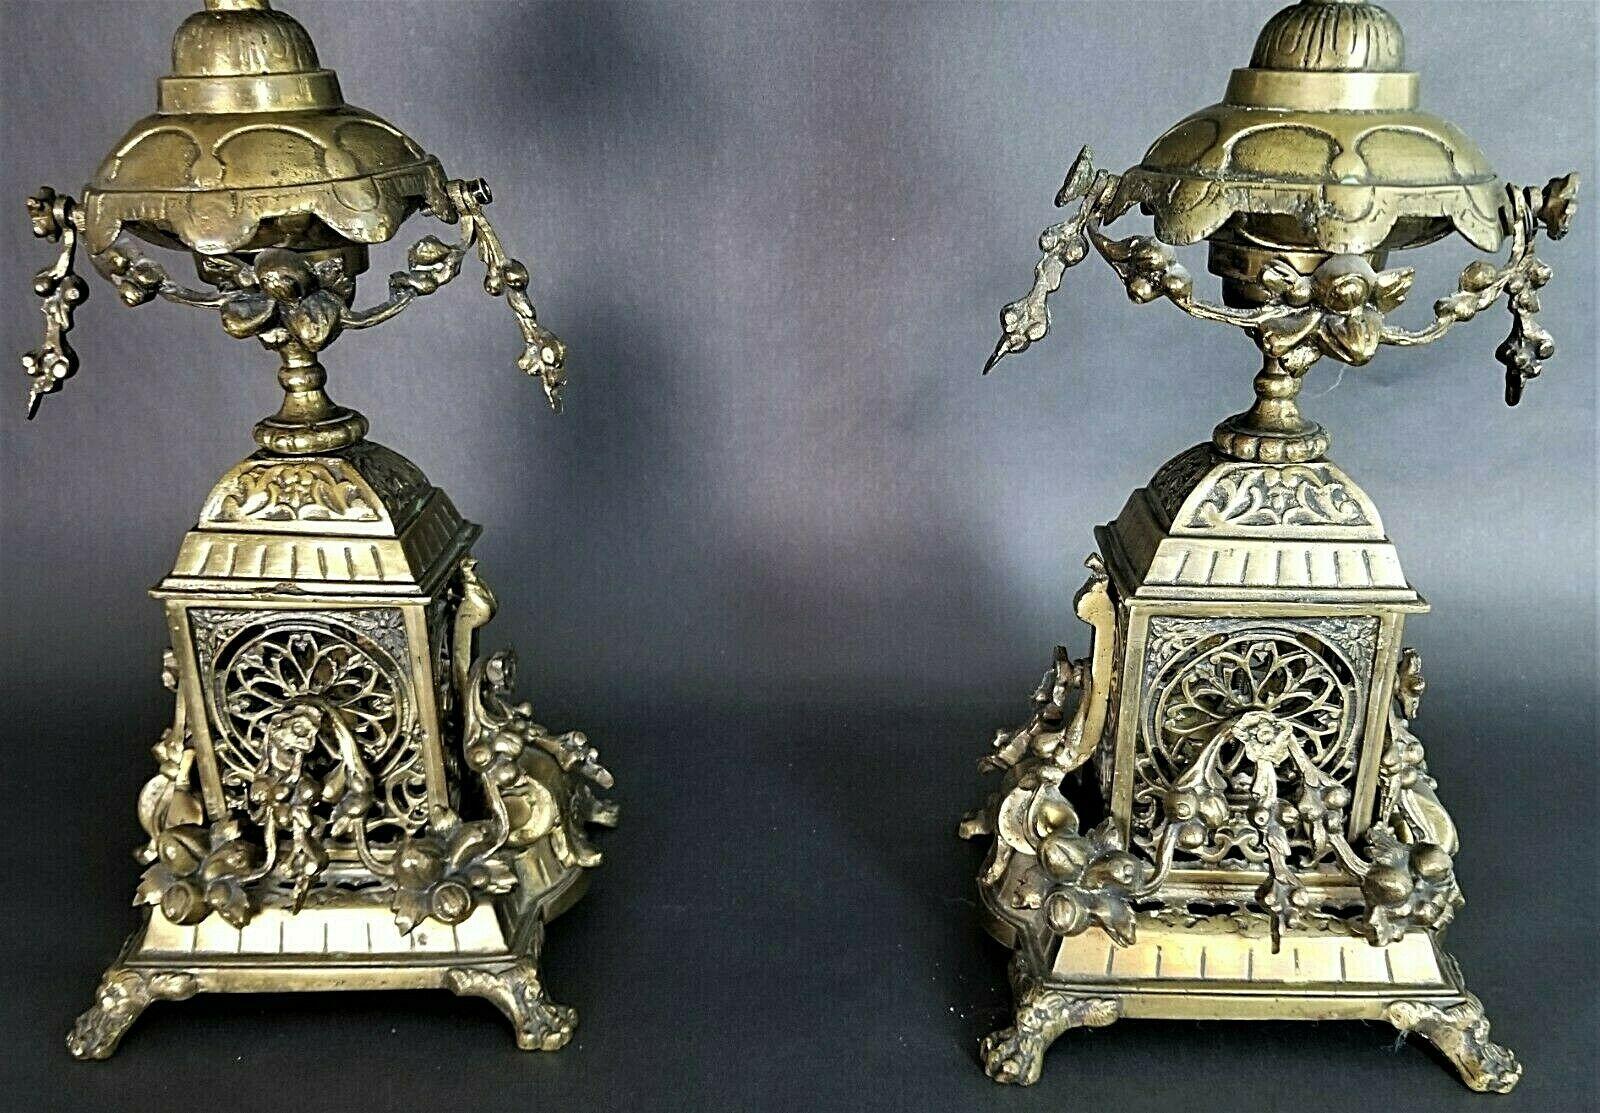 Antique Italian Ornate Bronze French Louis XV Rococo 6 Point Candelabras For Sale 1